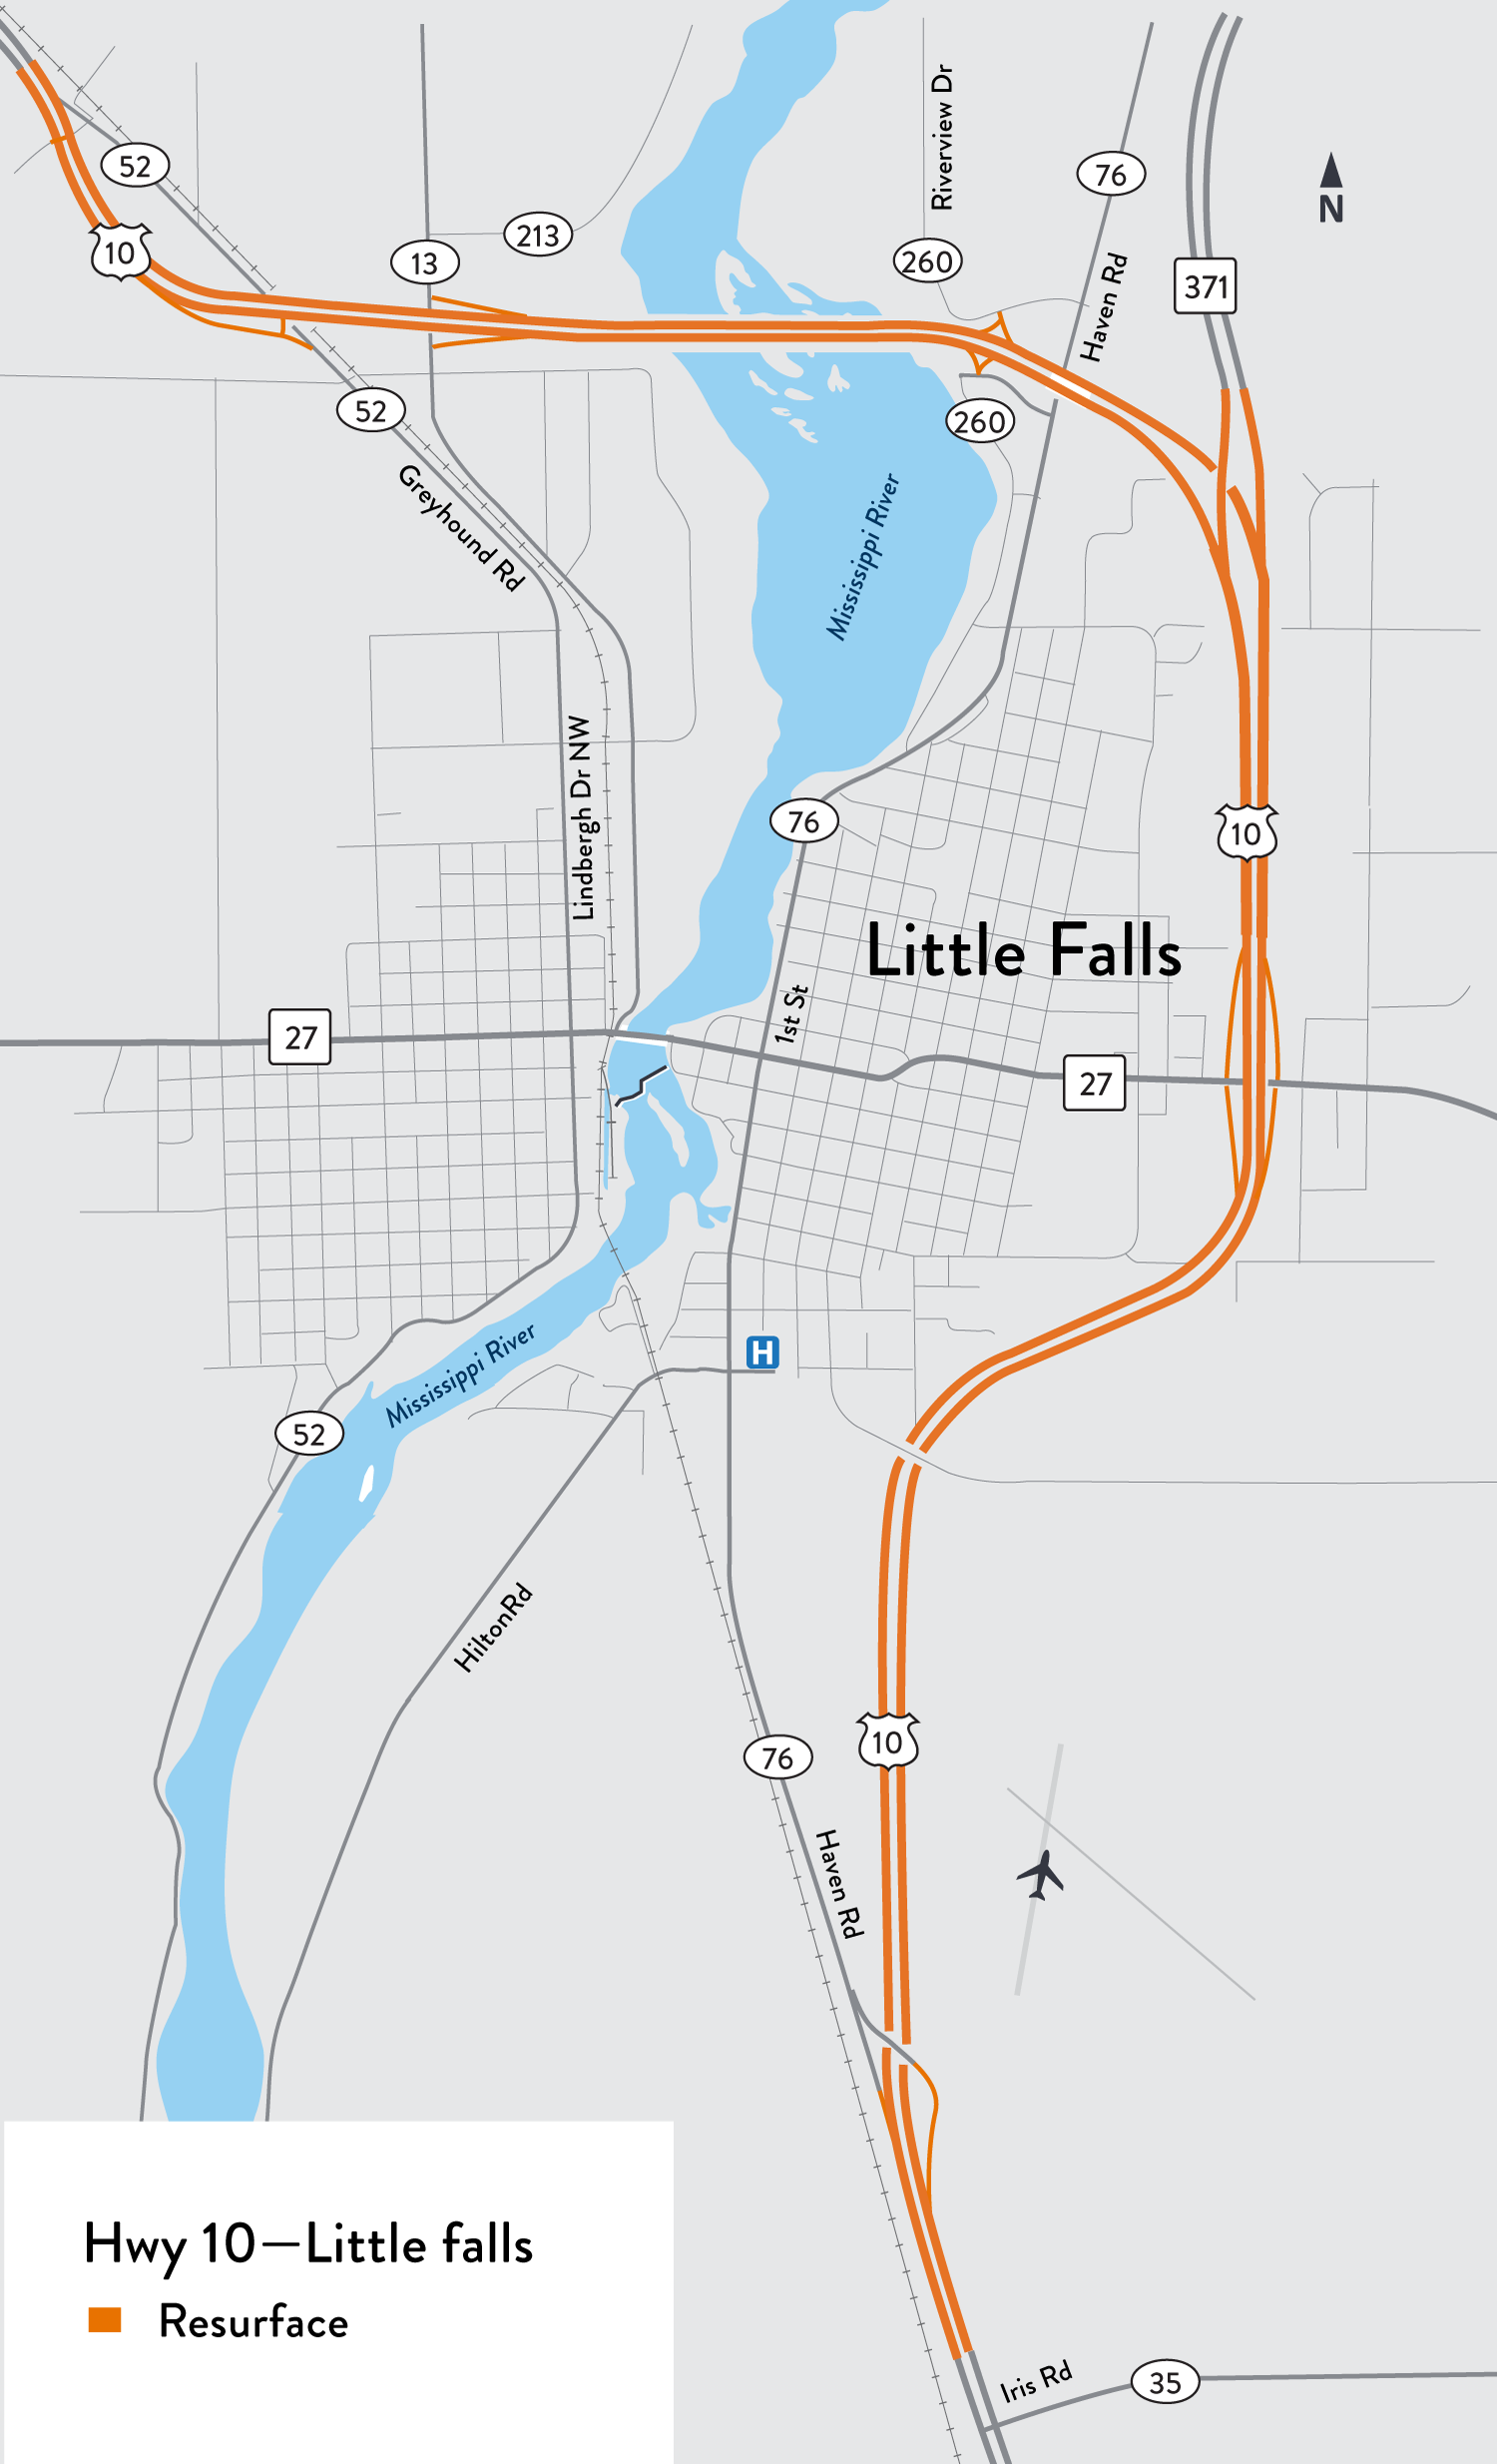 Project location map - Hwy 10 Little Falls